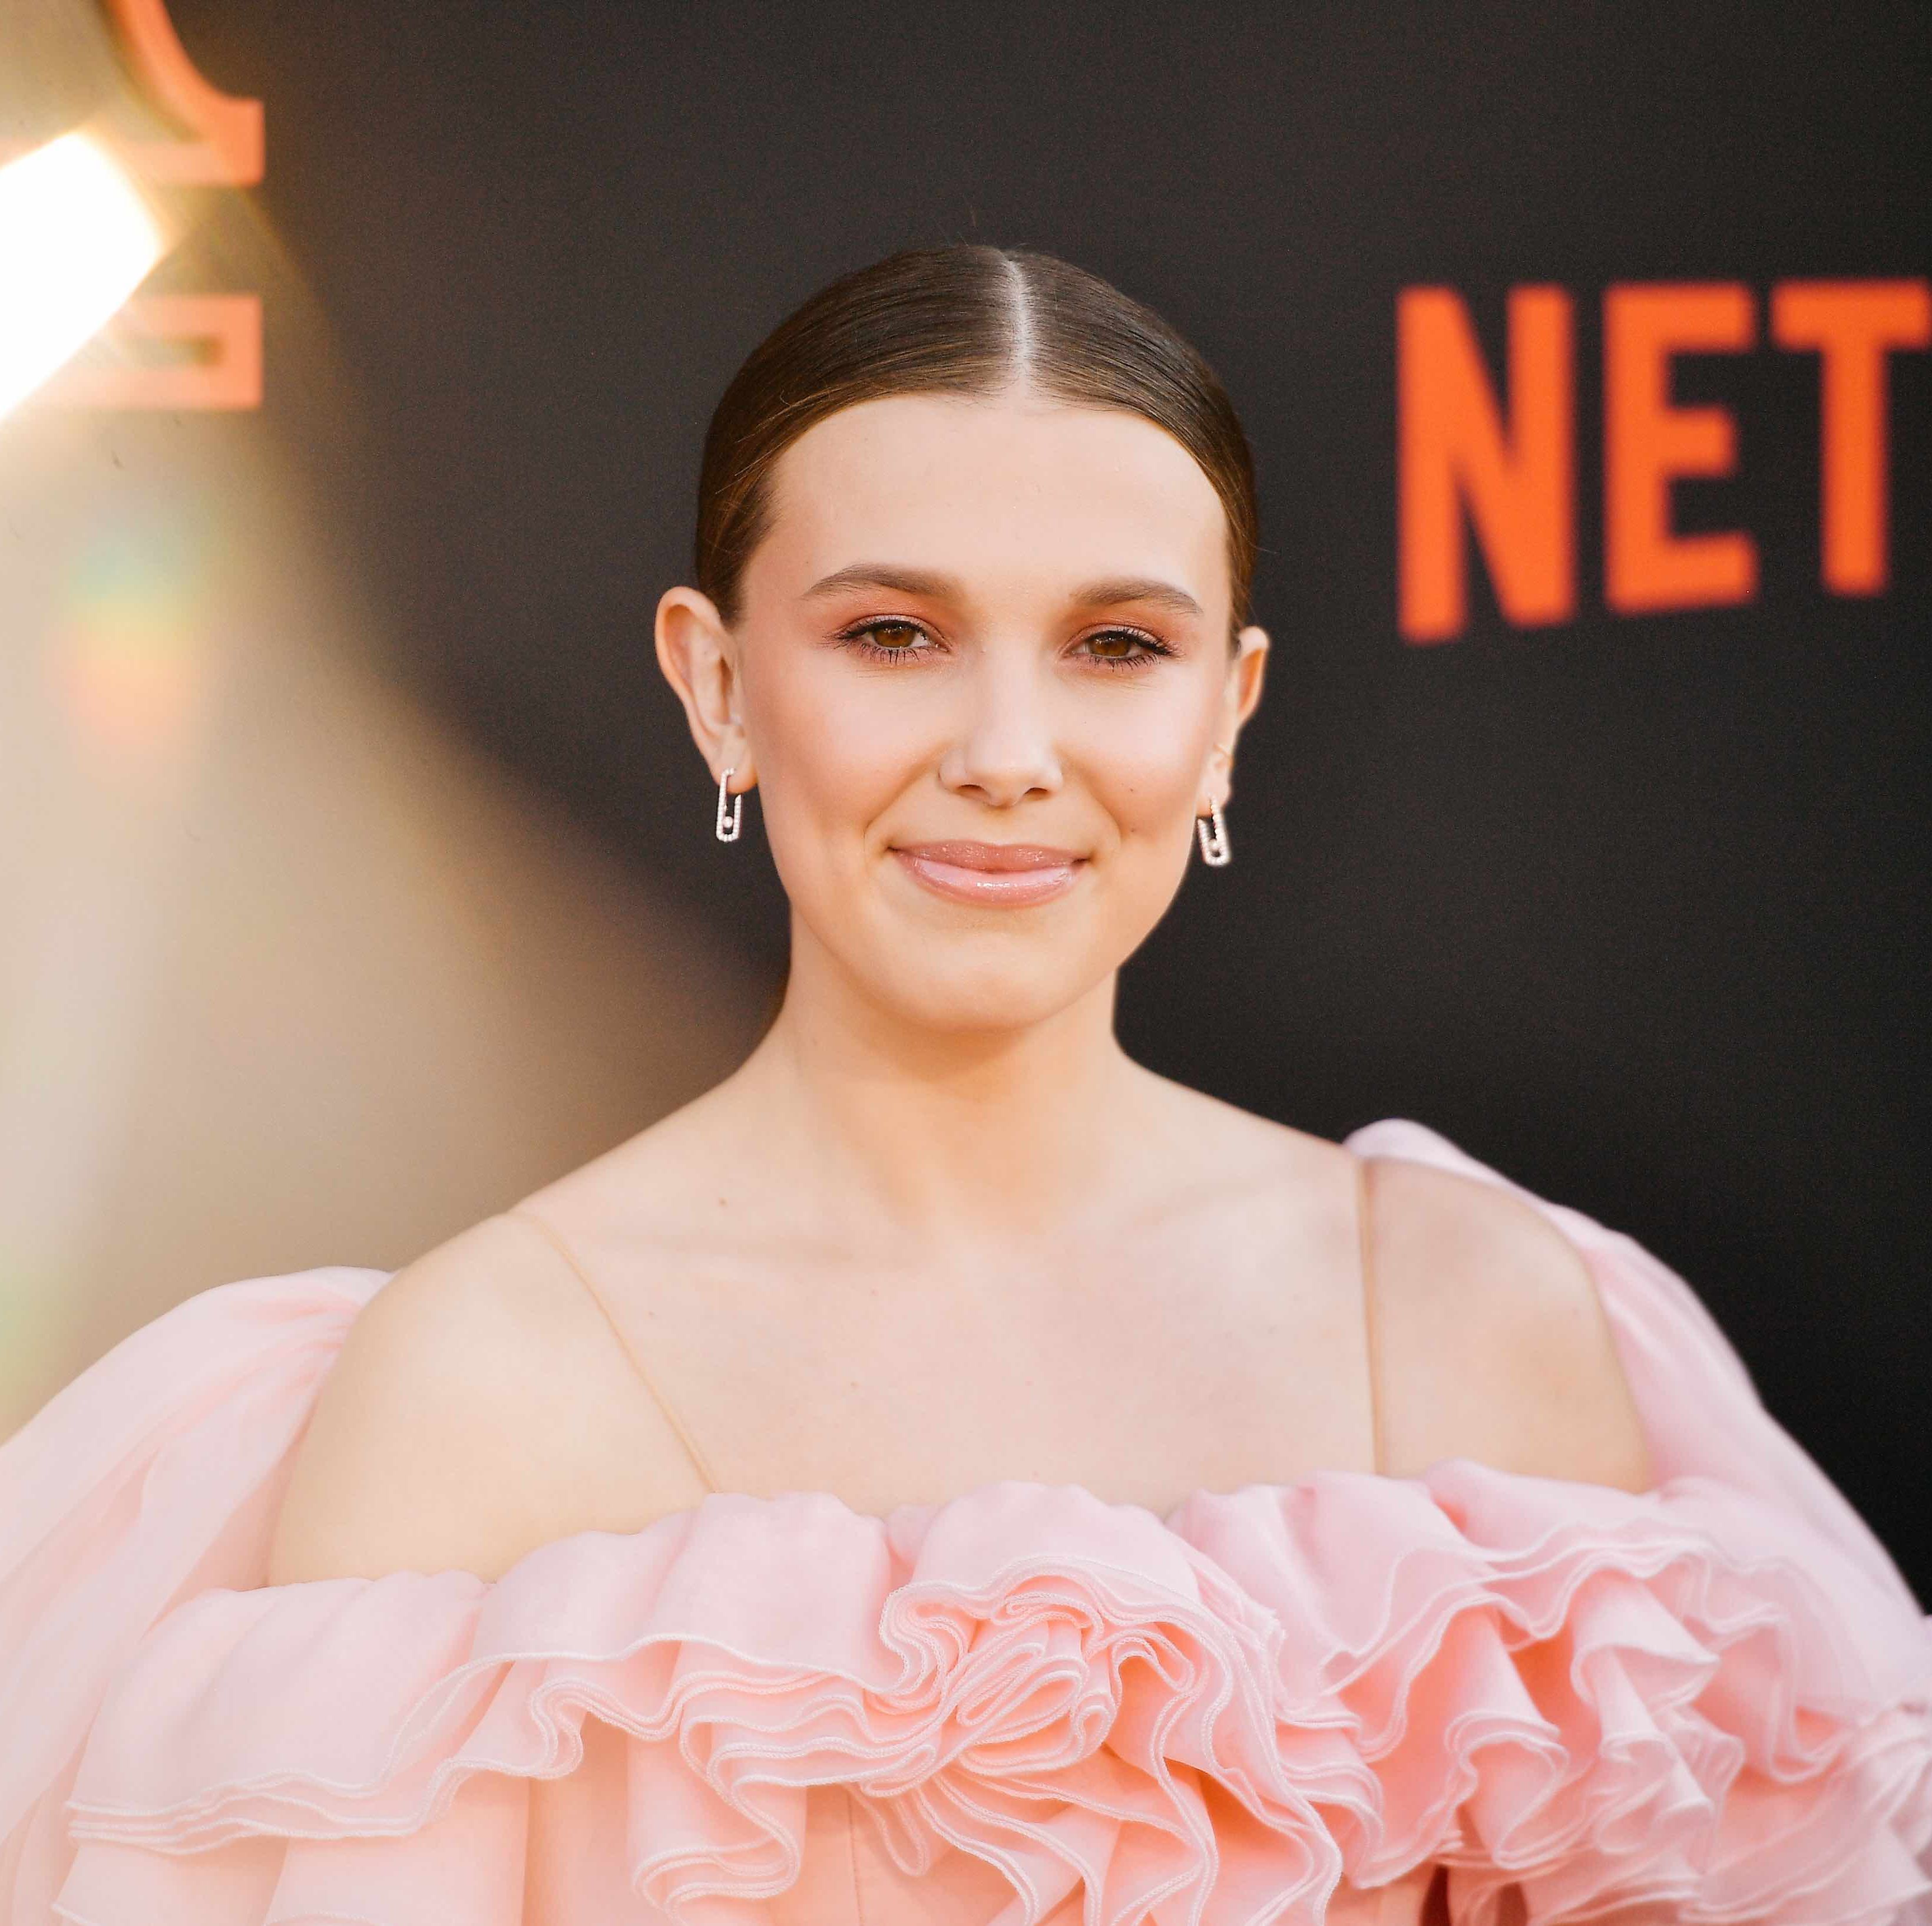 Millie Bobby Brown Wears Bedazzled Outfit at Osaka Comic Con